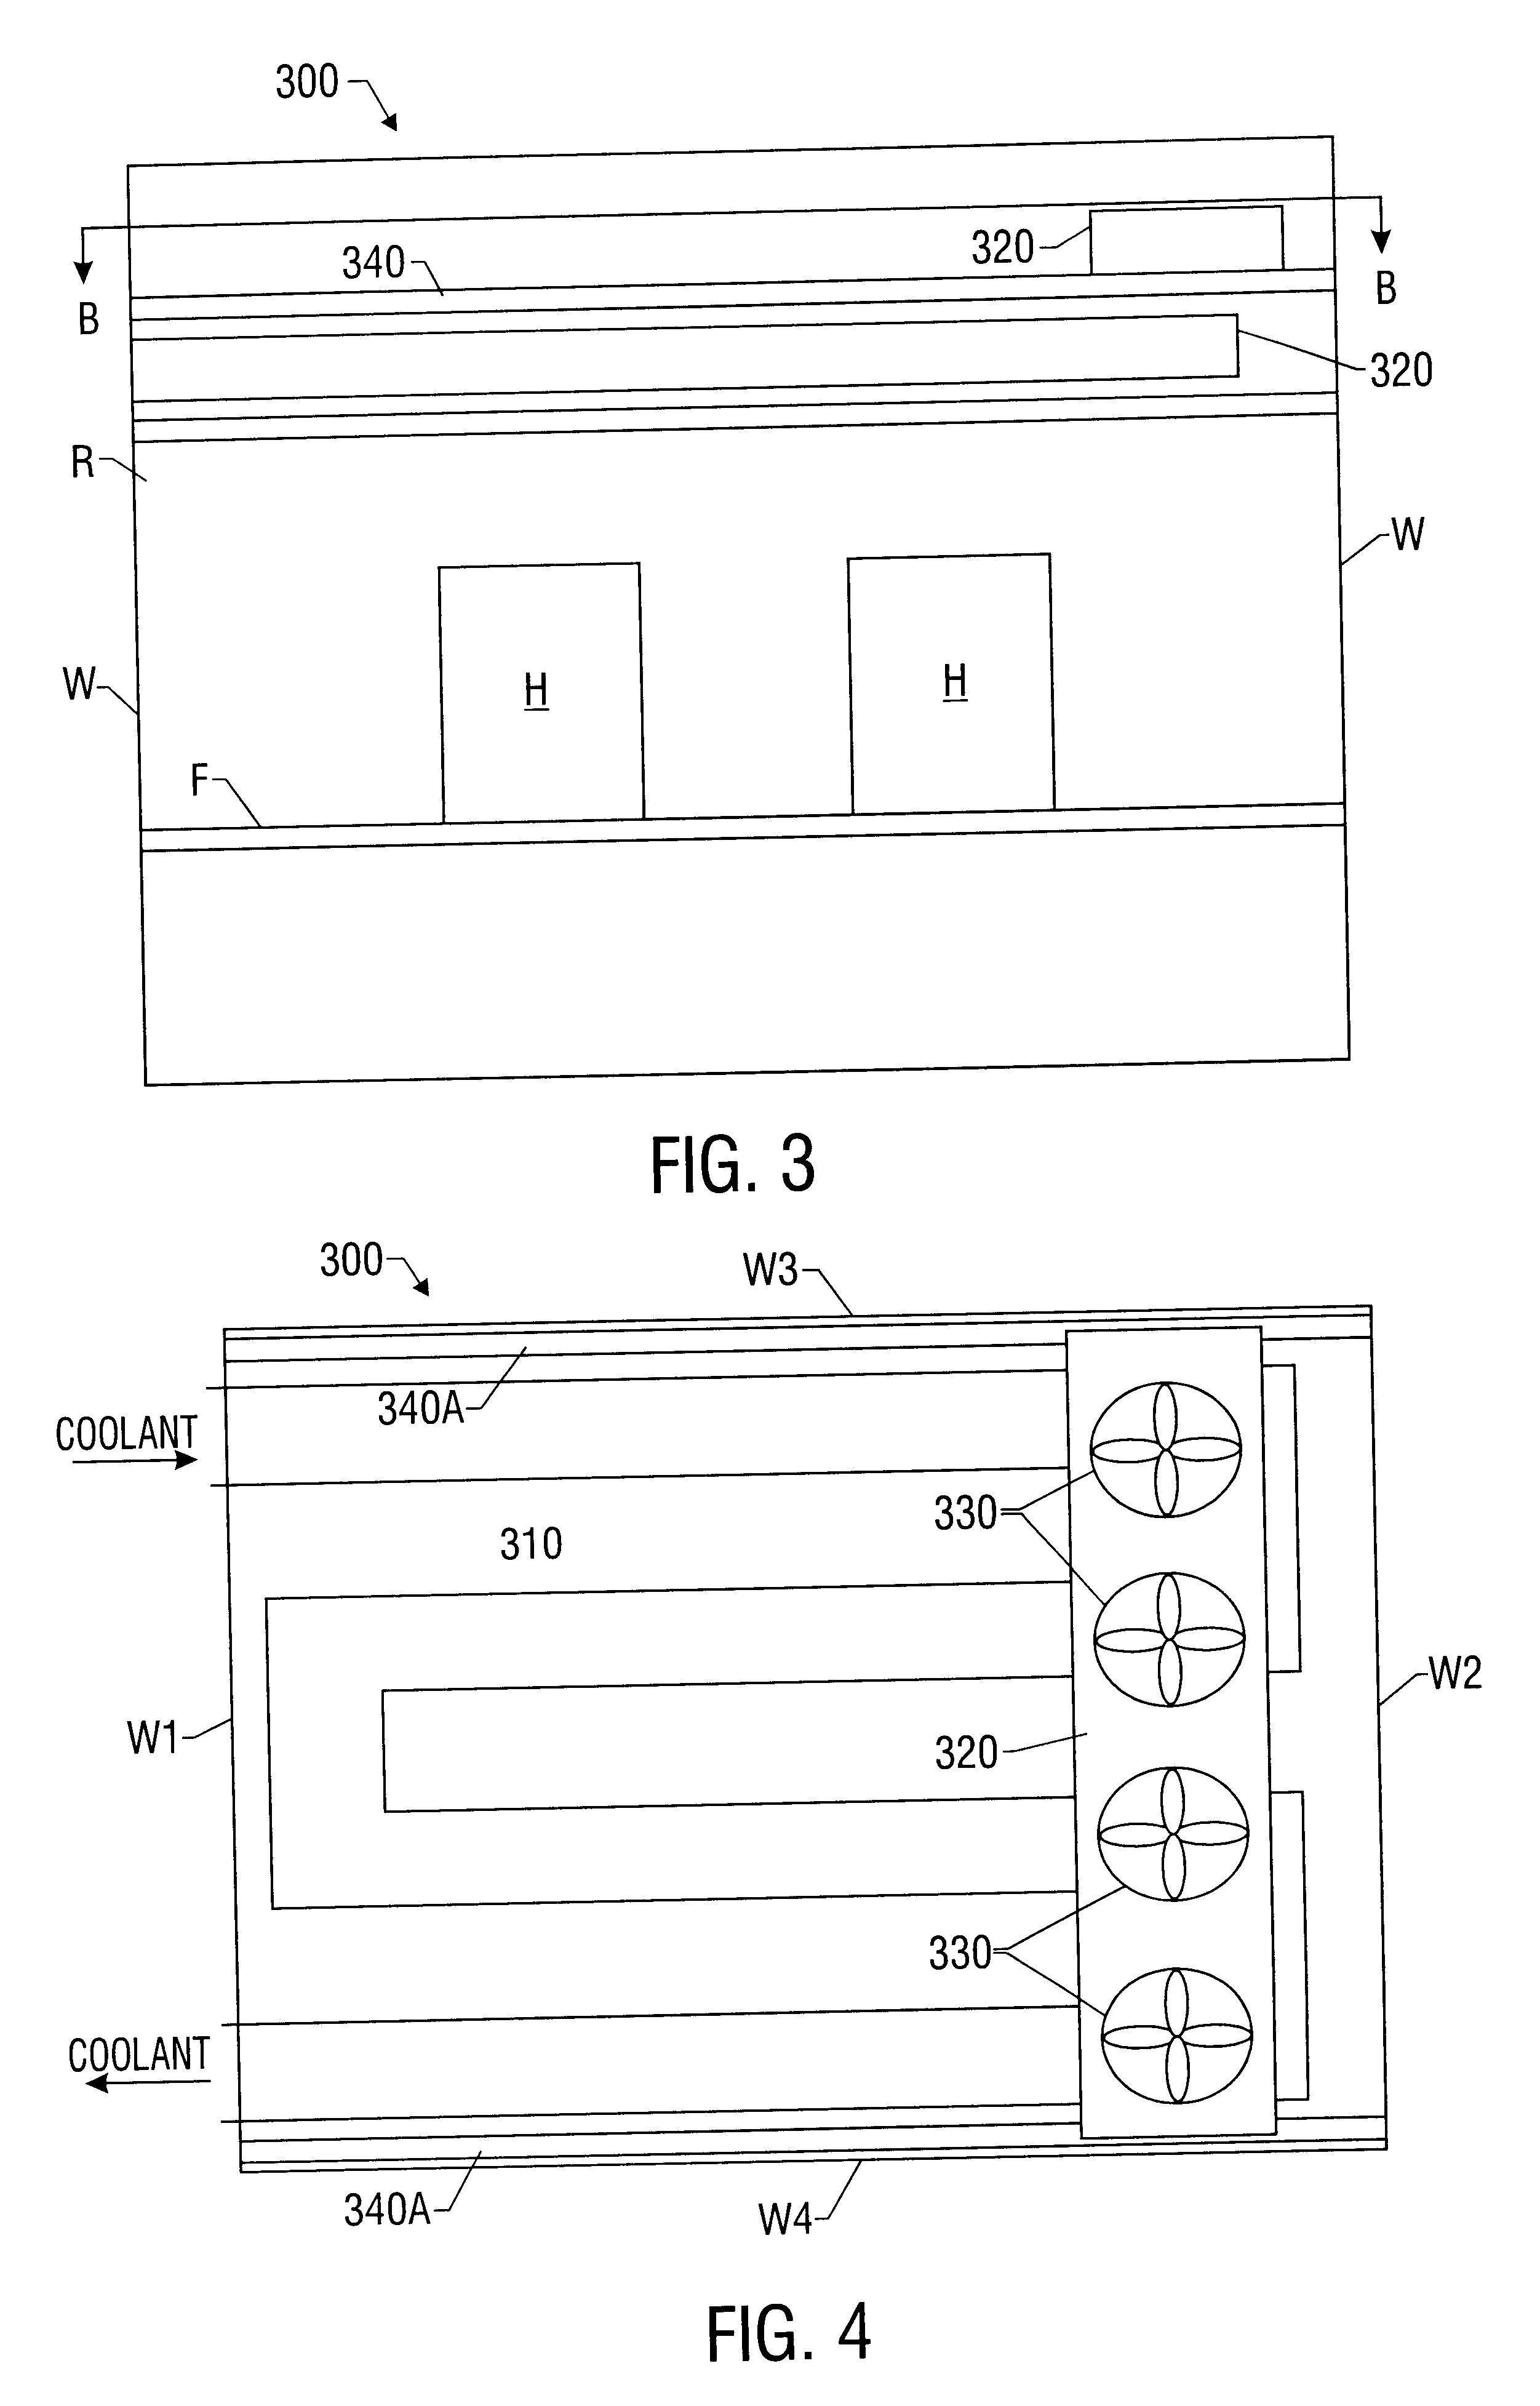 Configurable system and method for cooling a room